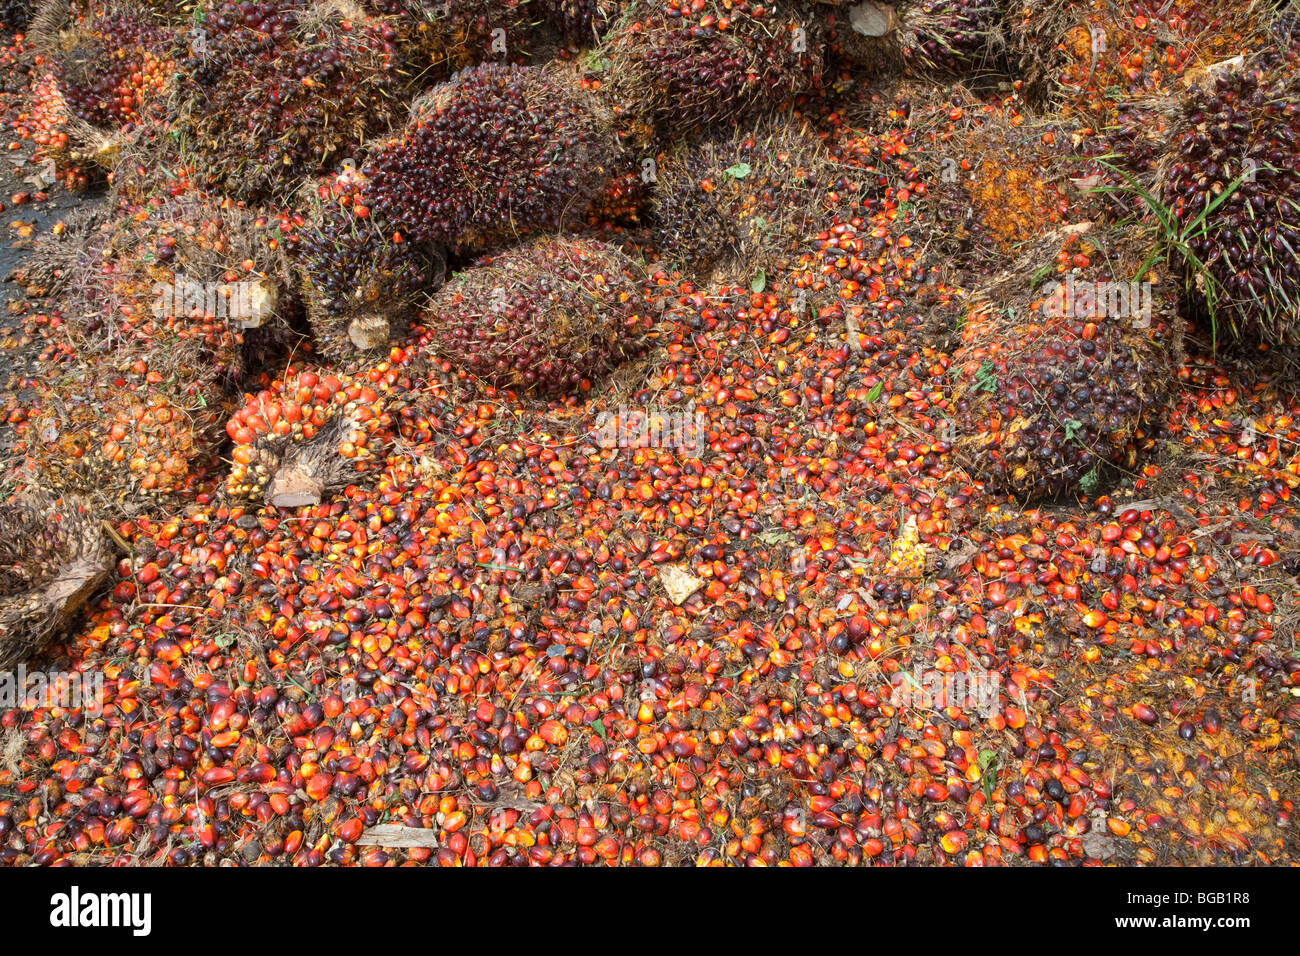 Pile of oil palm fresh fruit bunches (FFBs) and loose fruits await inspection and processing at mill. Sindora Palm Oil Mill Stock Photo